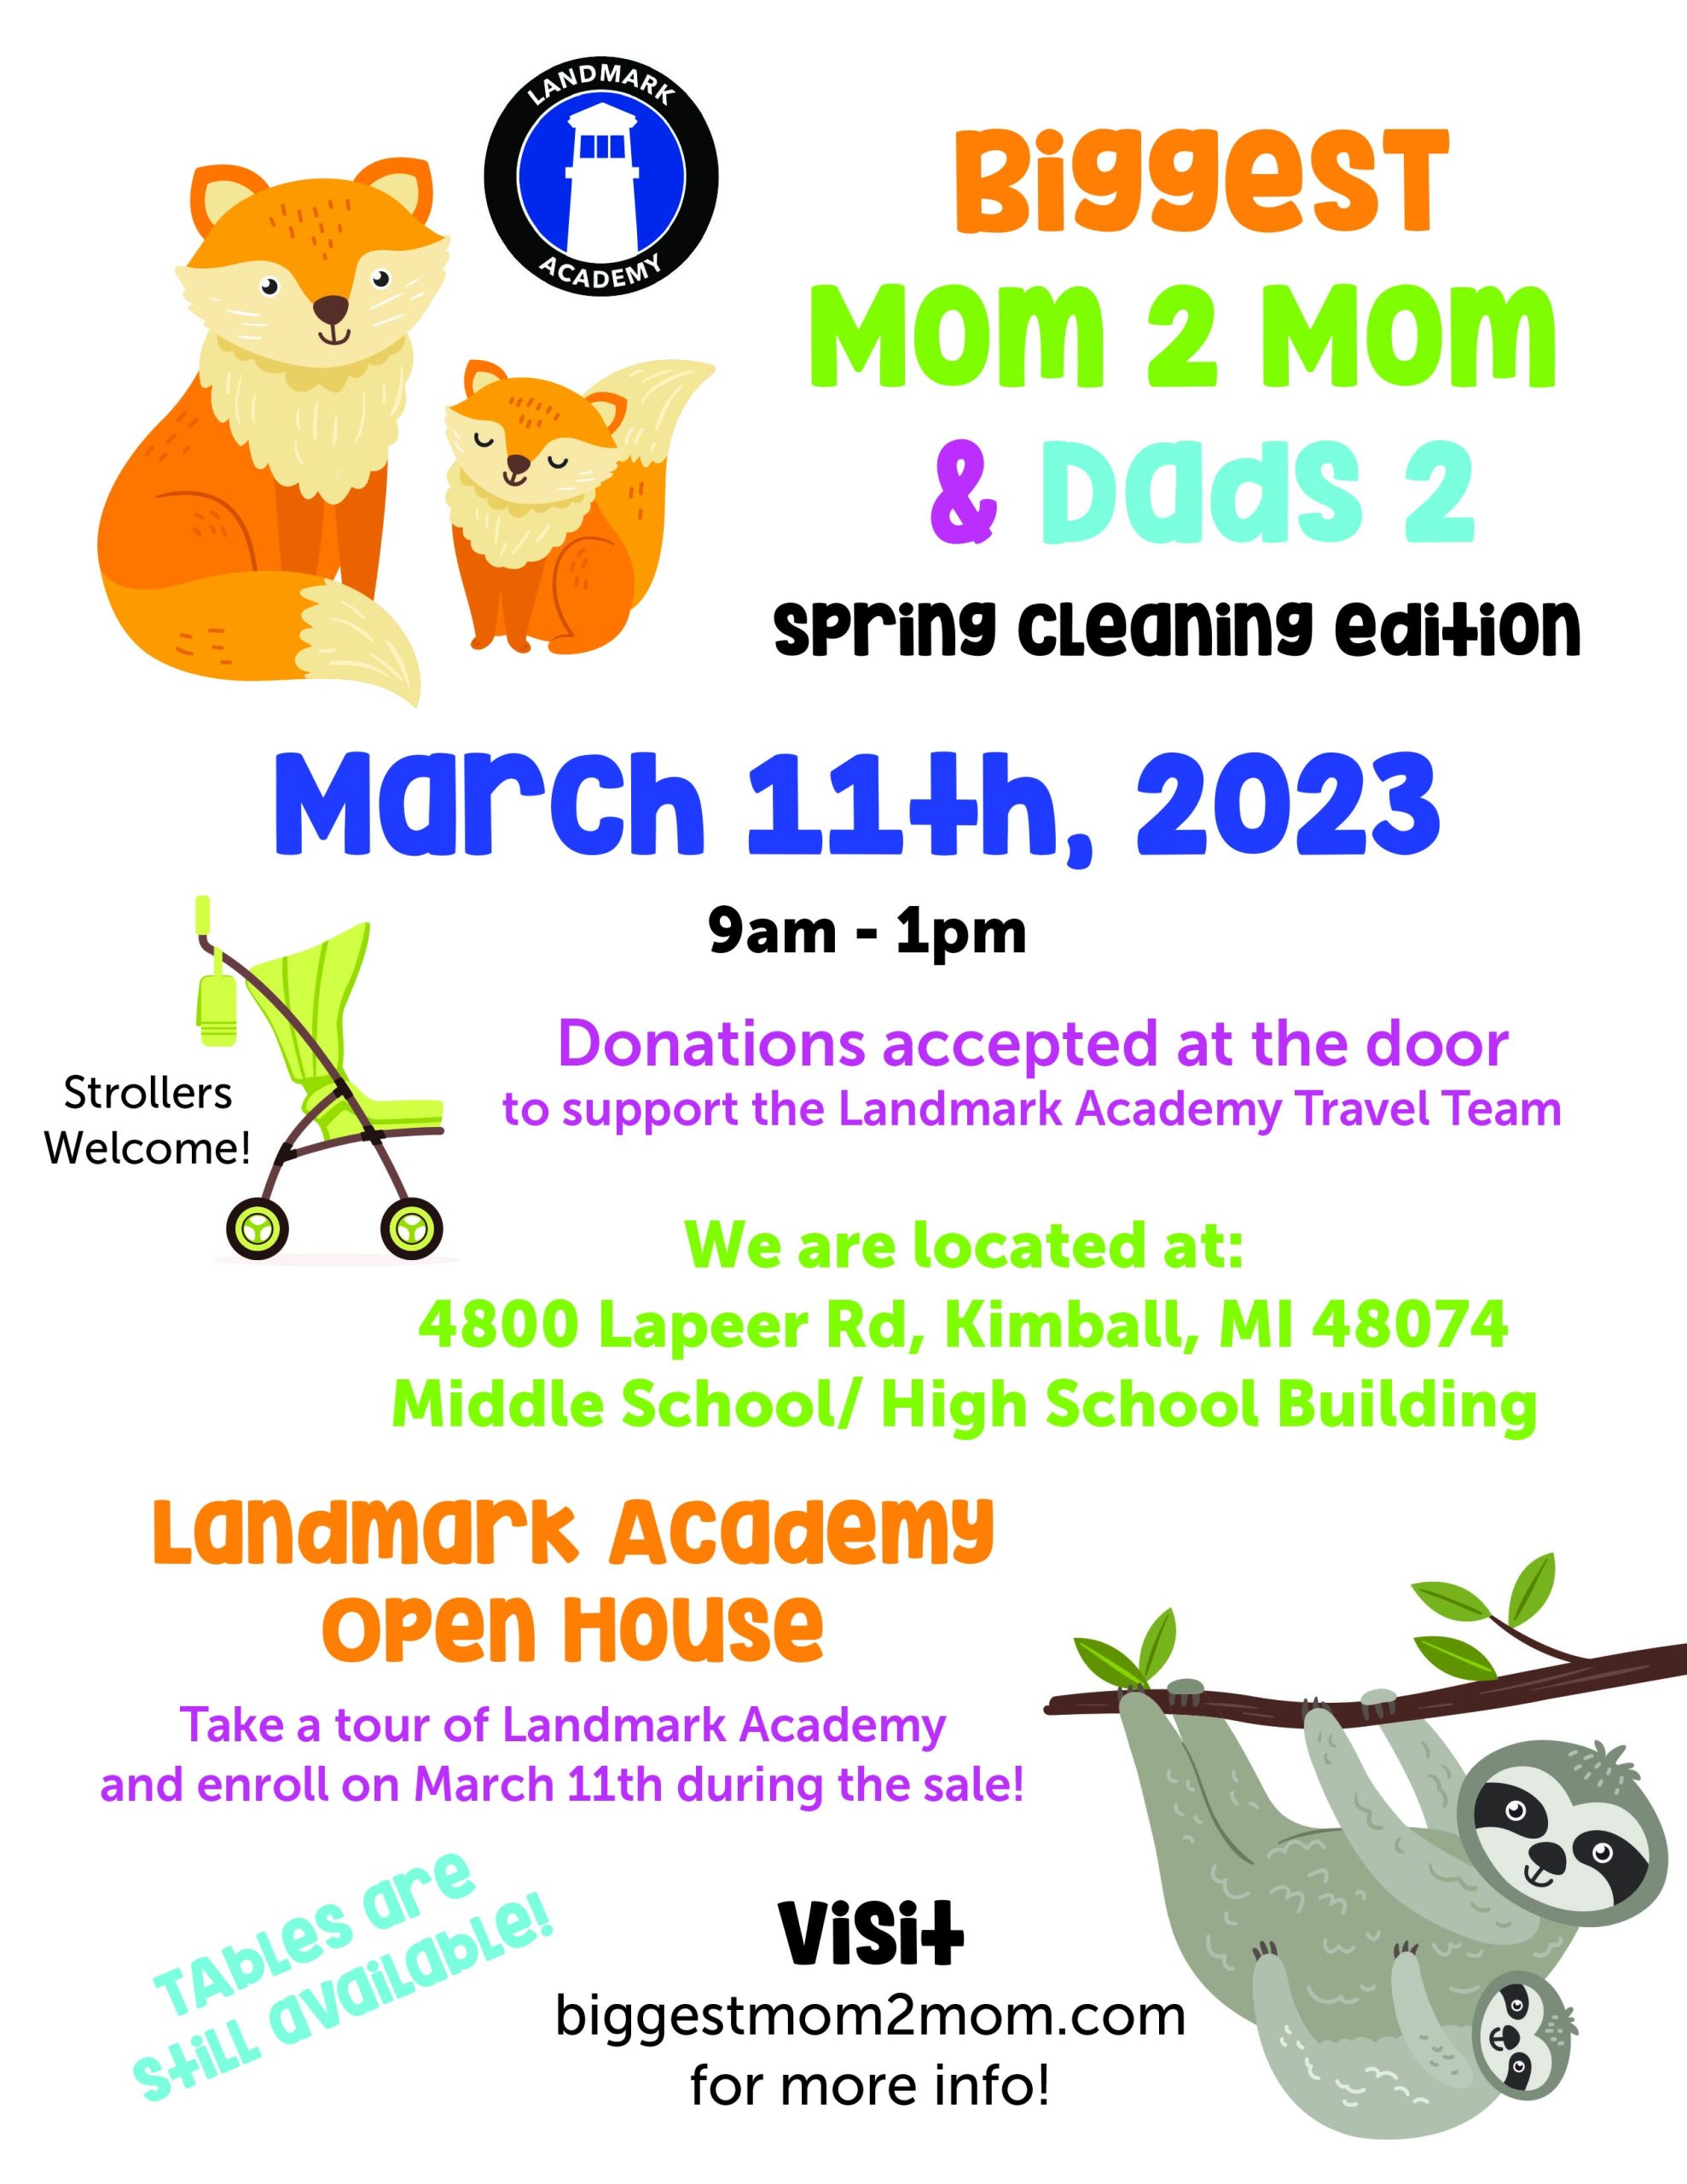 Biggest Mom 2 Mom and Dads 2 Spring Cleaning Edition March 11th 2023 from 9am - 1pm. Donations accepted at the door for admission. You can also take a tour during the mom to mom sale. 